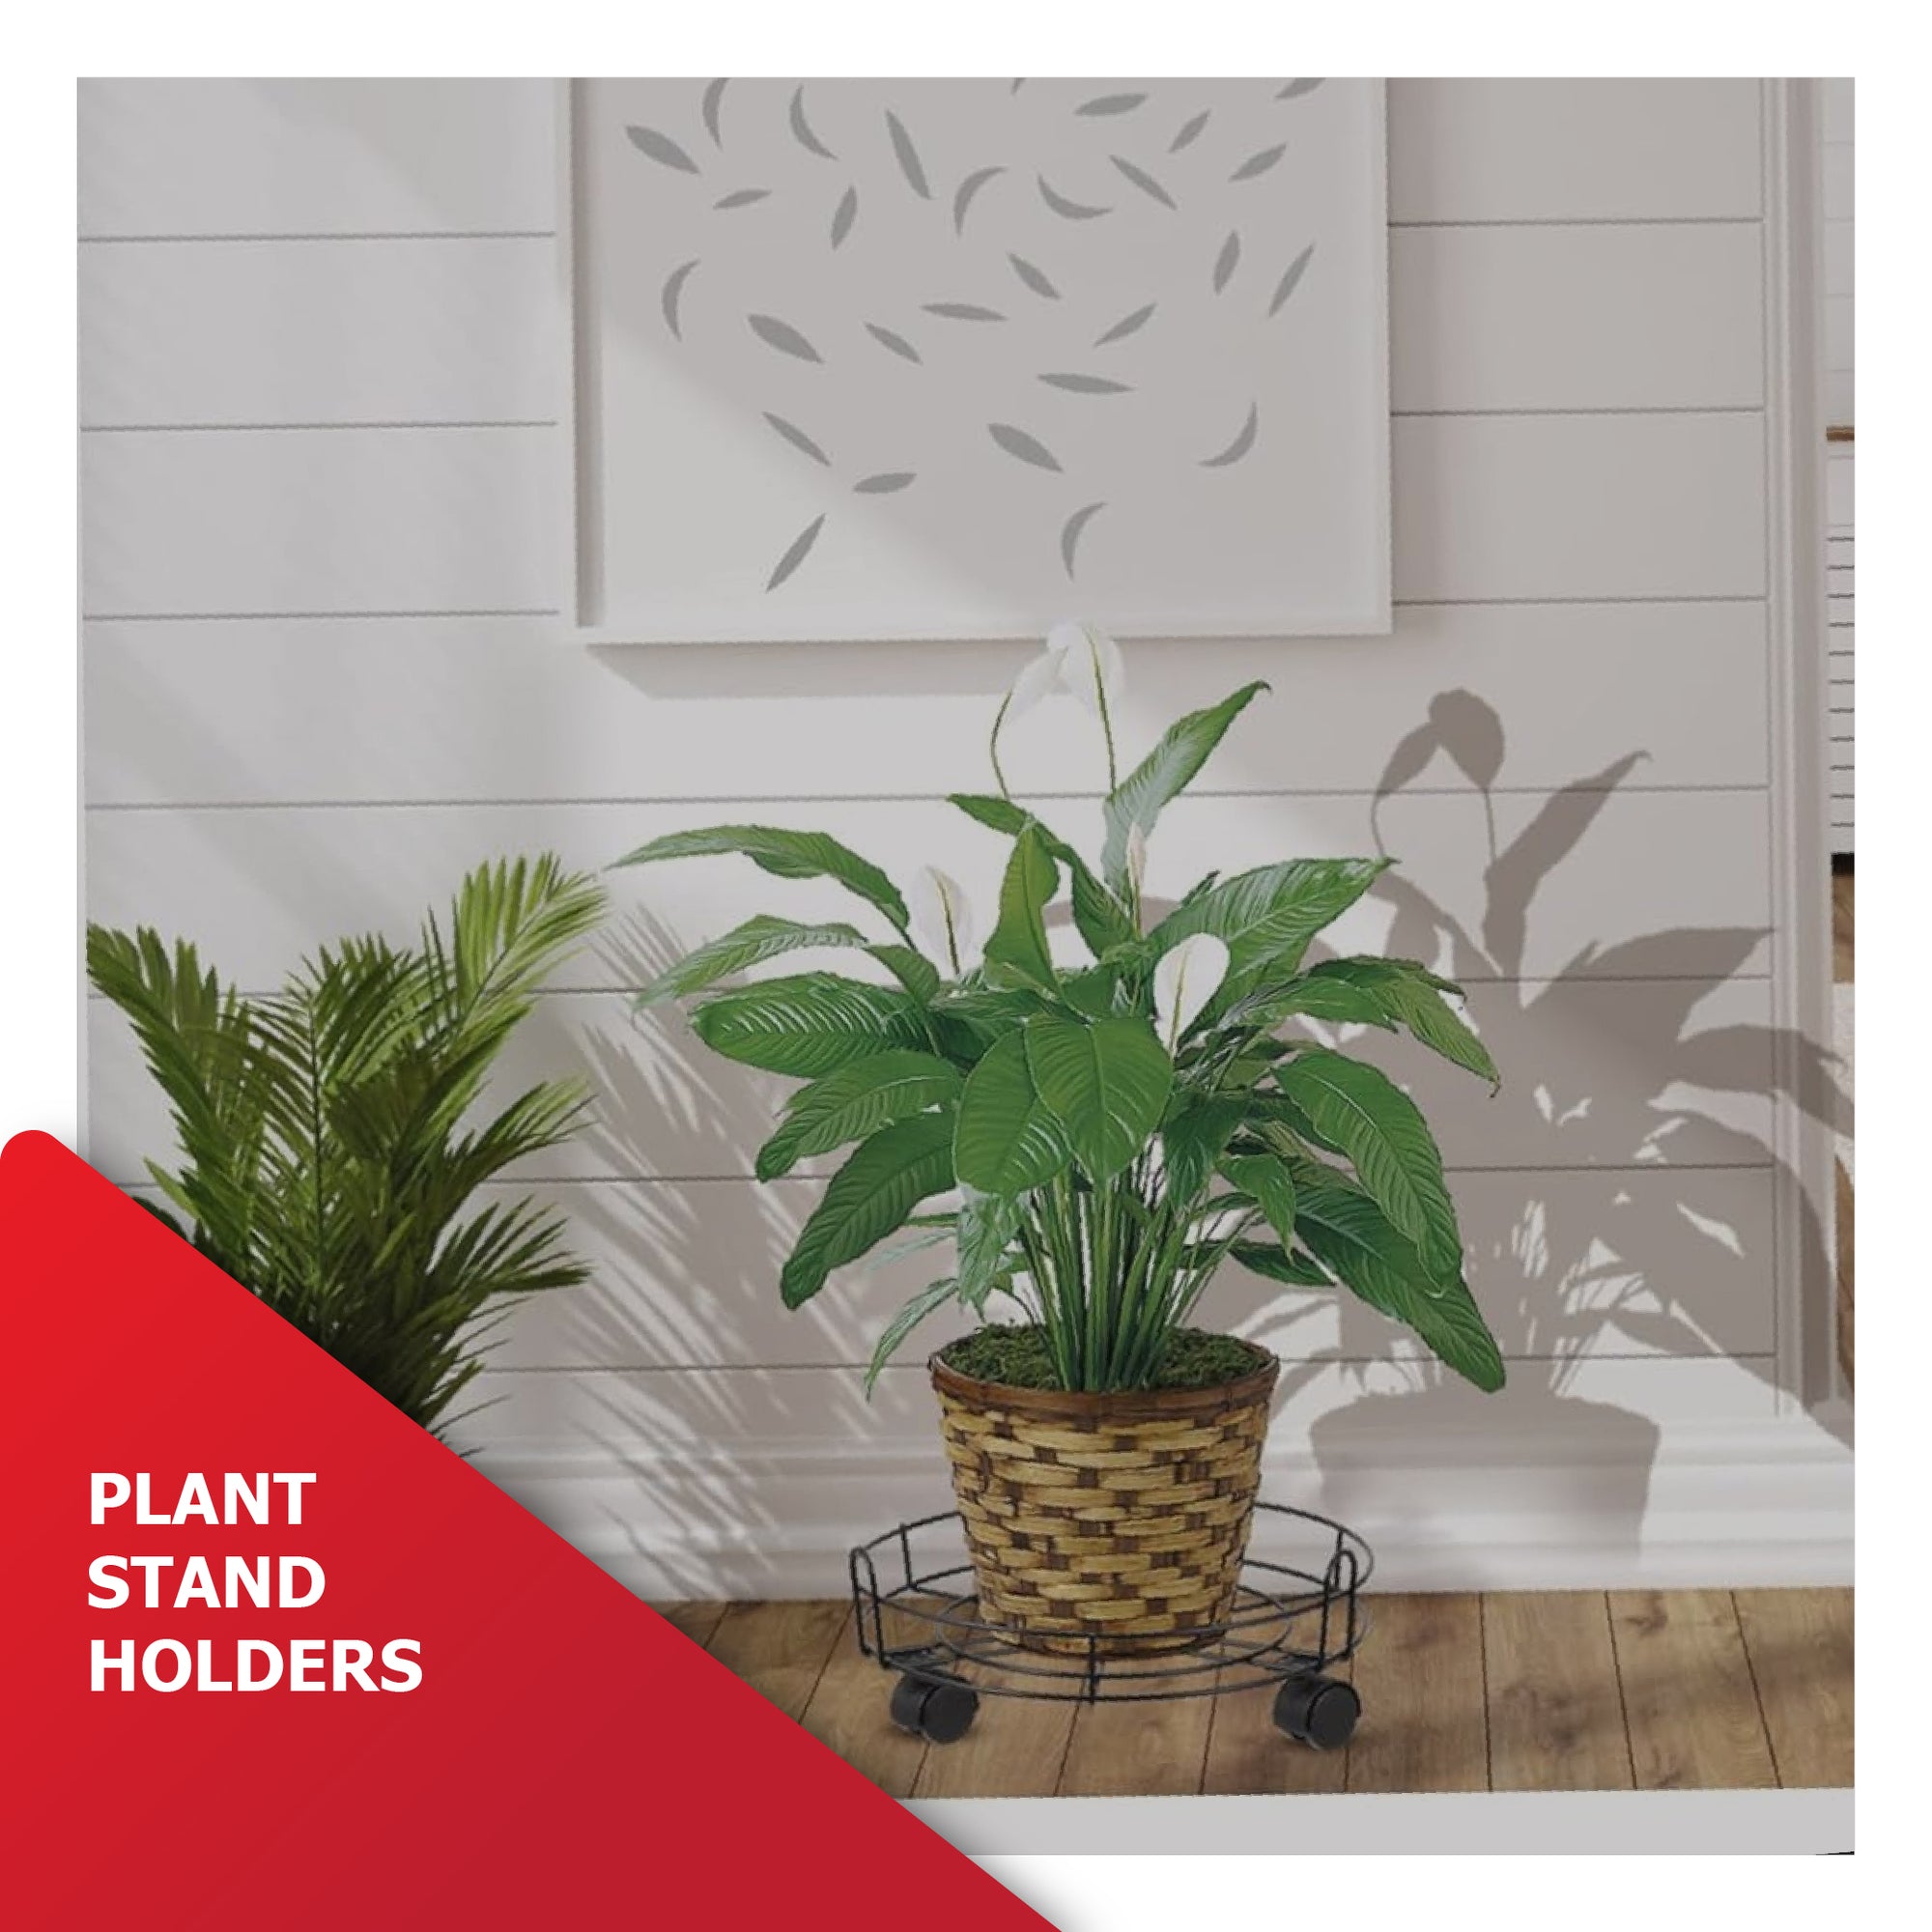 Plant Stand Holders | Category